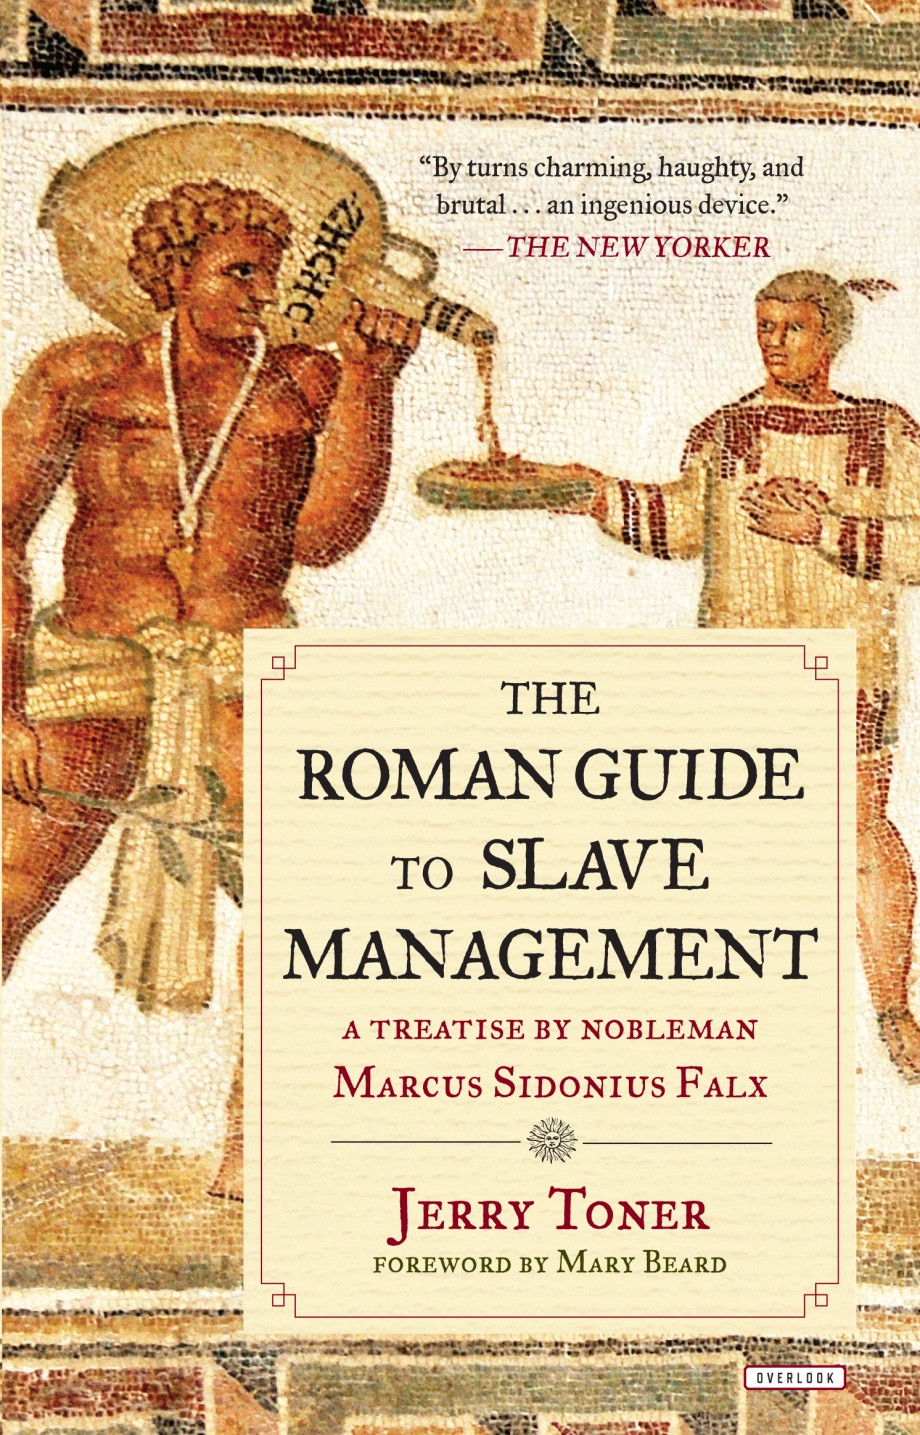 Roman Guide to Slave Management A Treatise by Nobleman Marcus Sidonius Falx